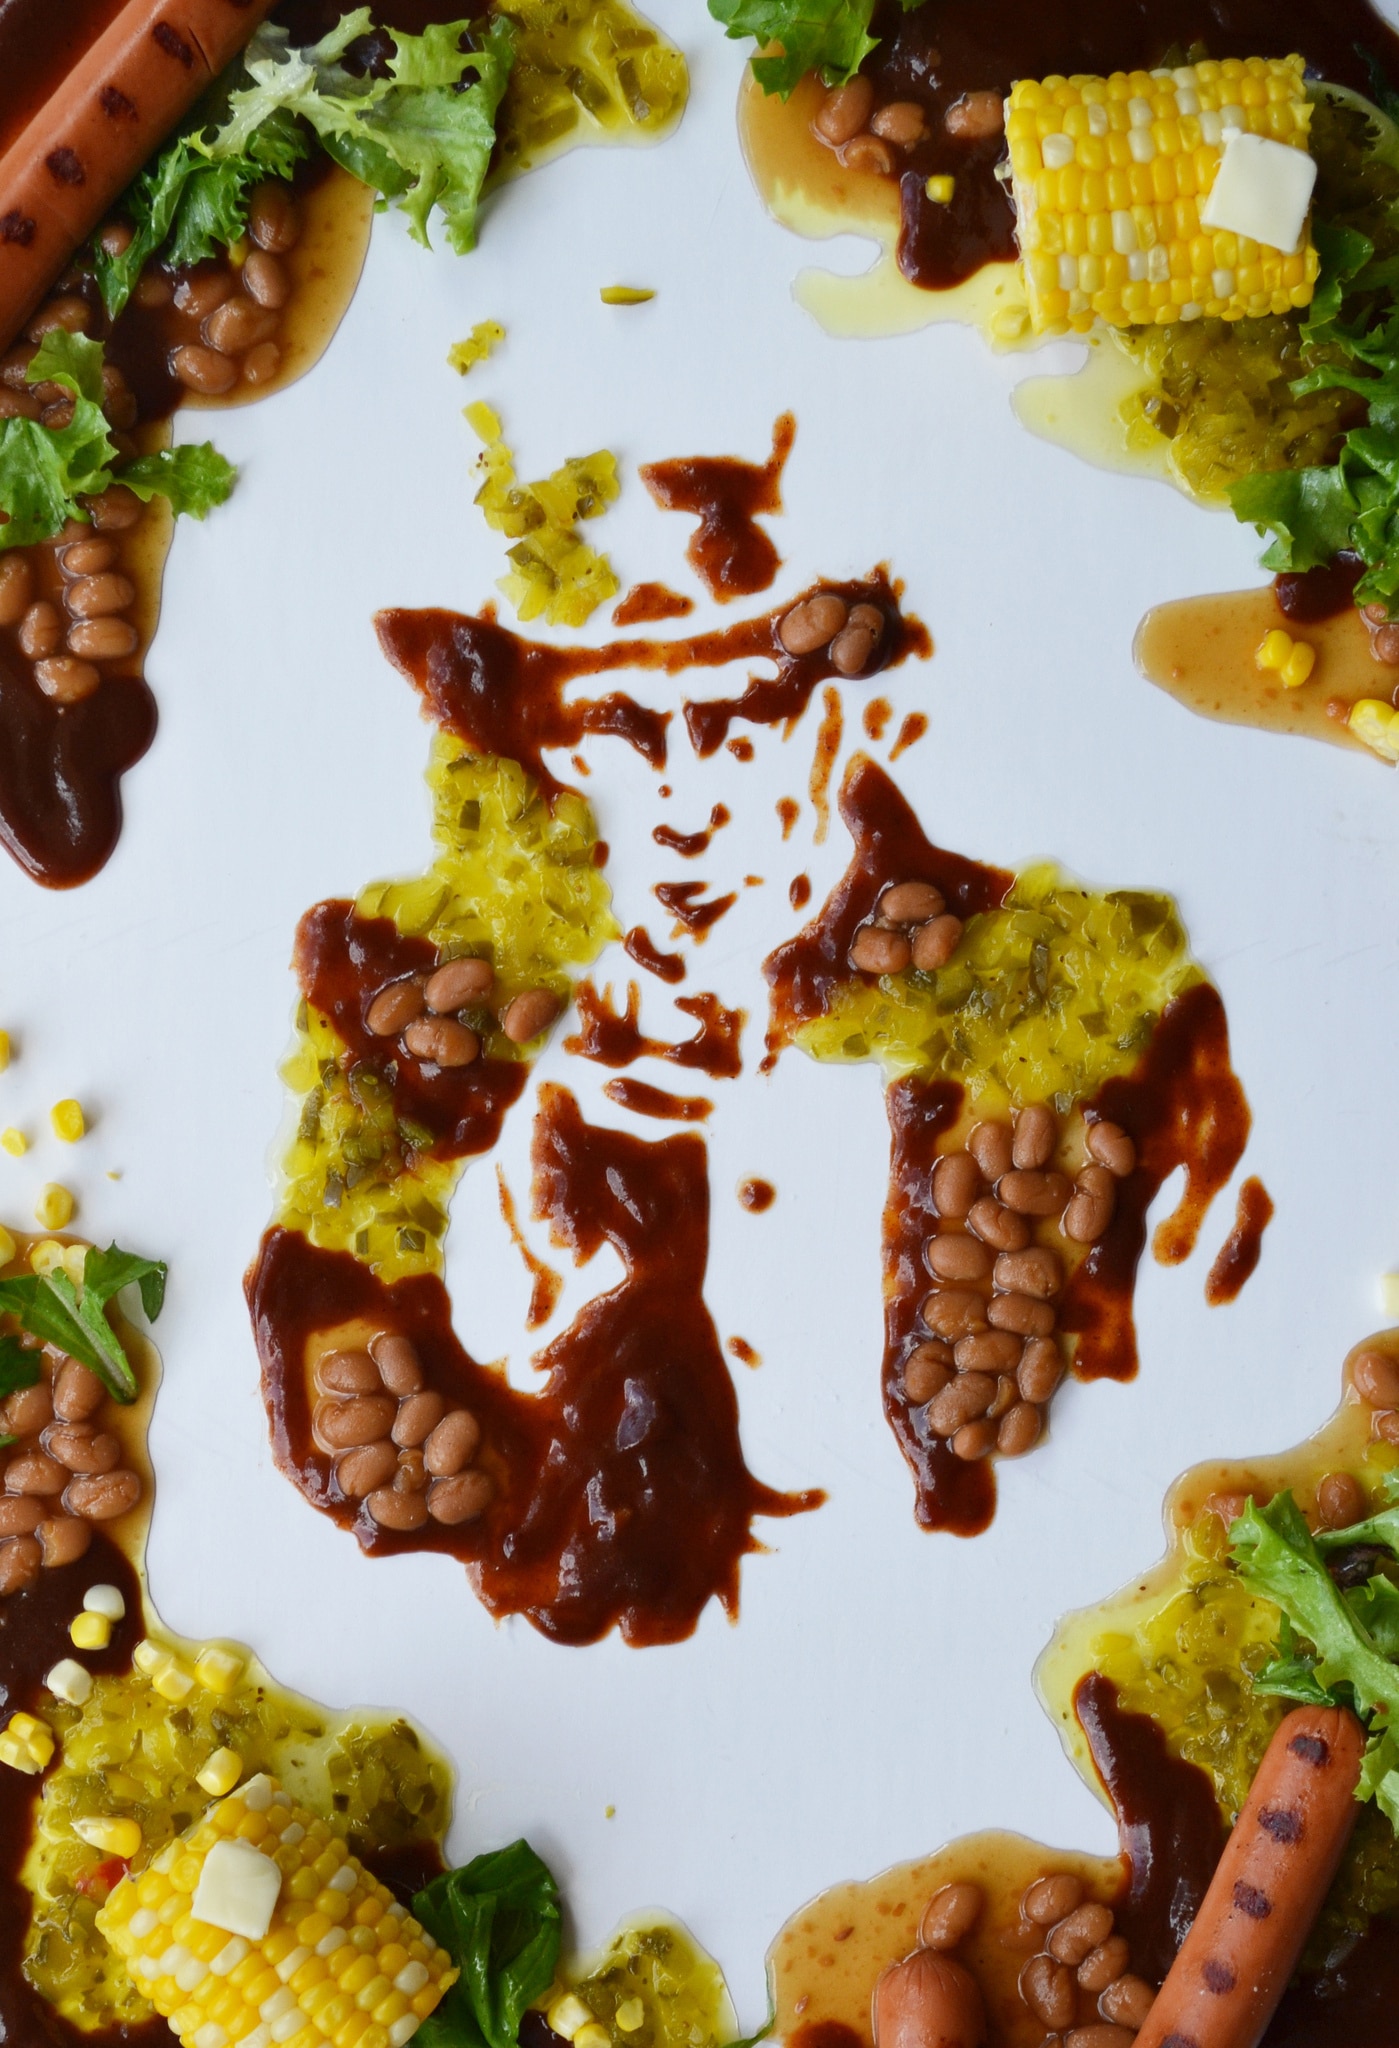 Food Art: Uncle Sam & Mt. Rushmore Like You’ve Never Seen Before